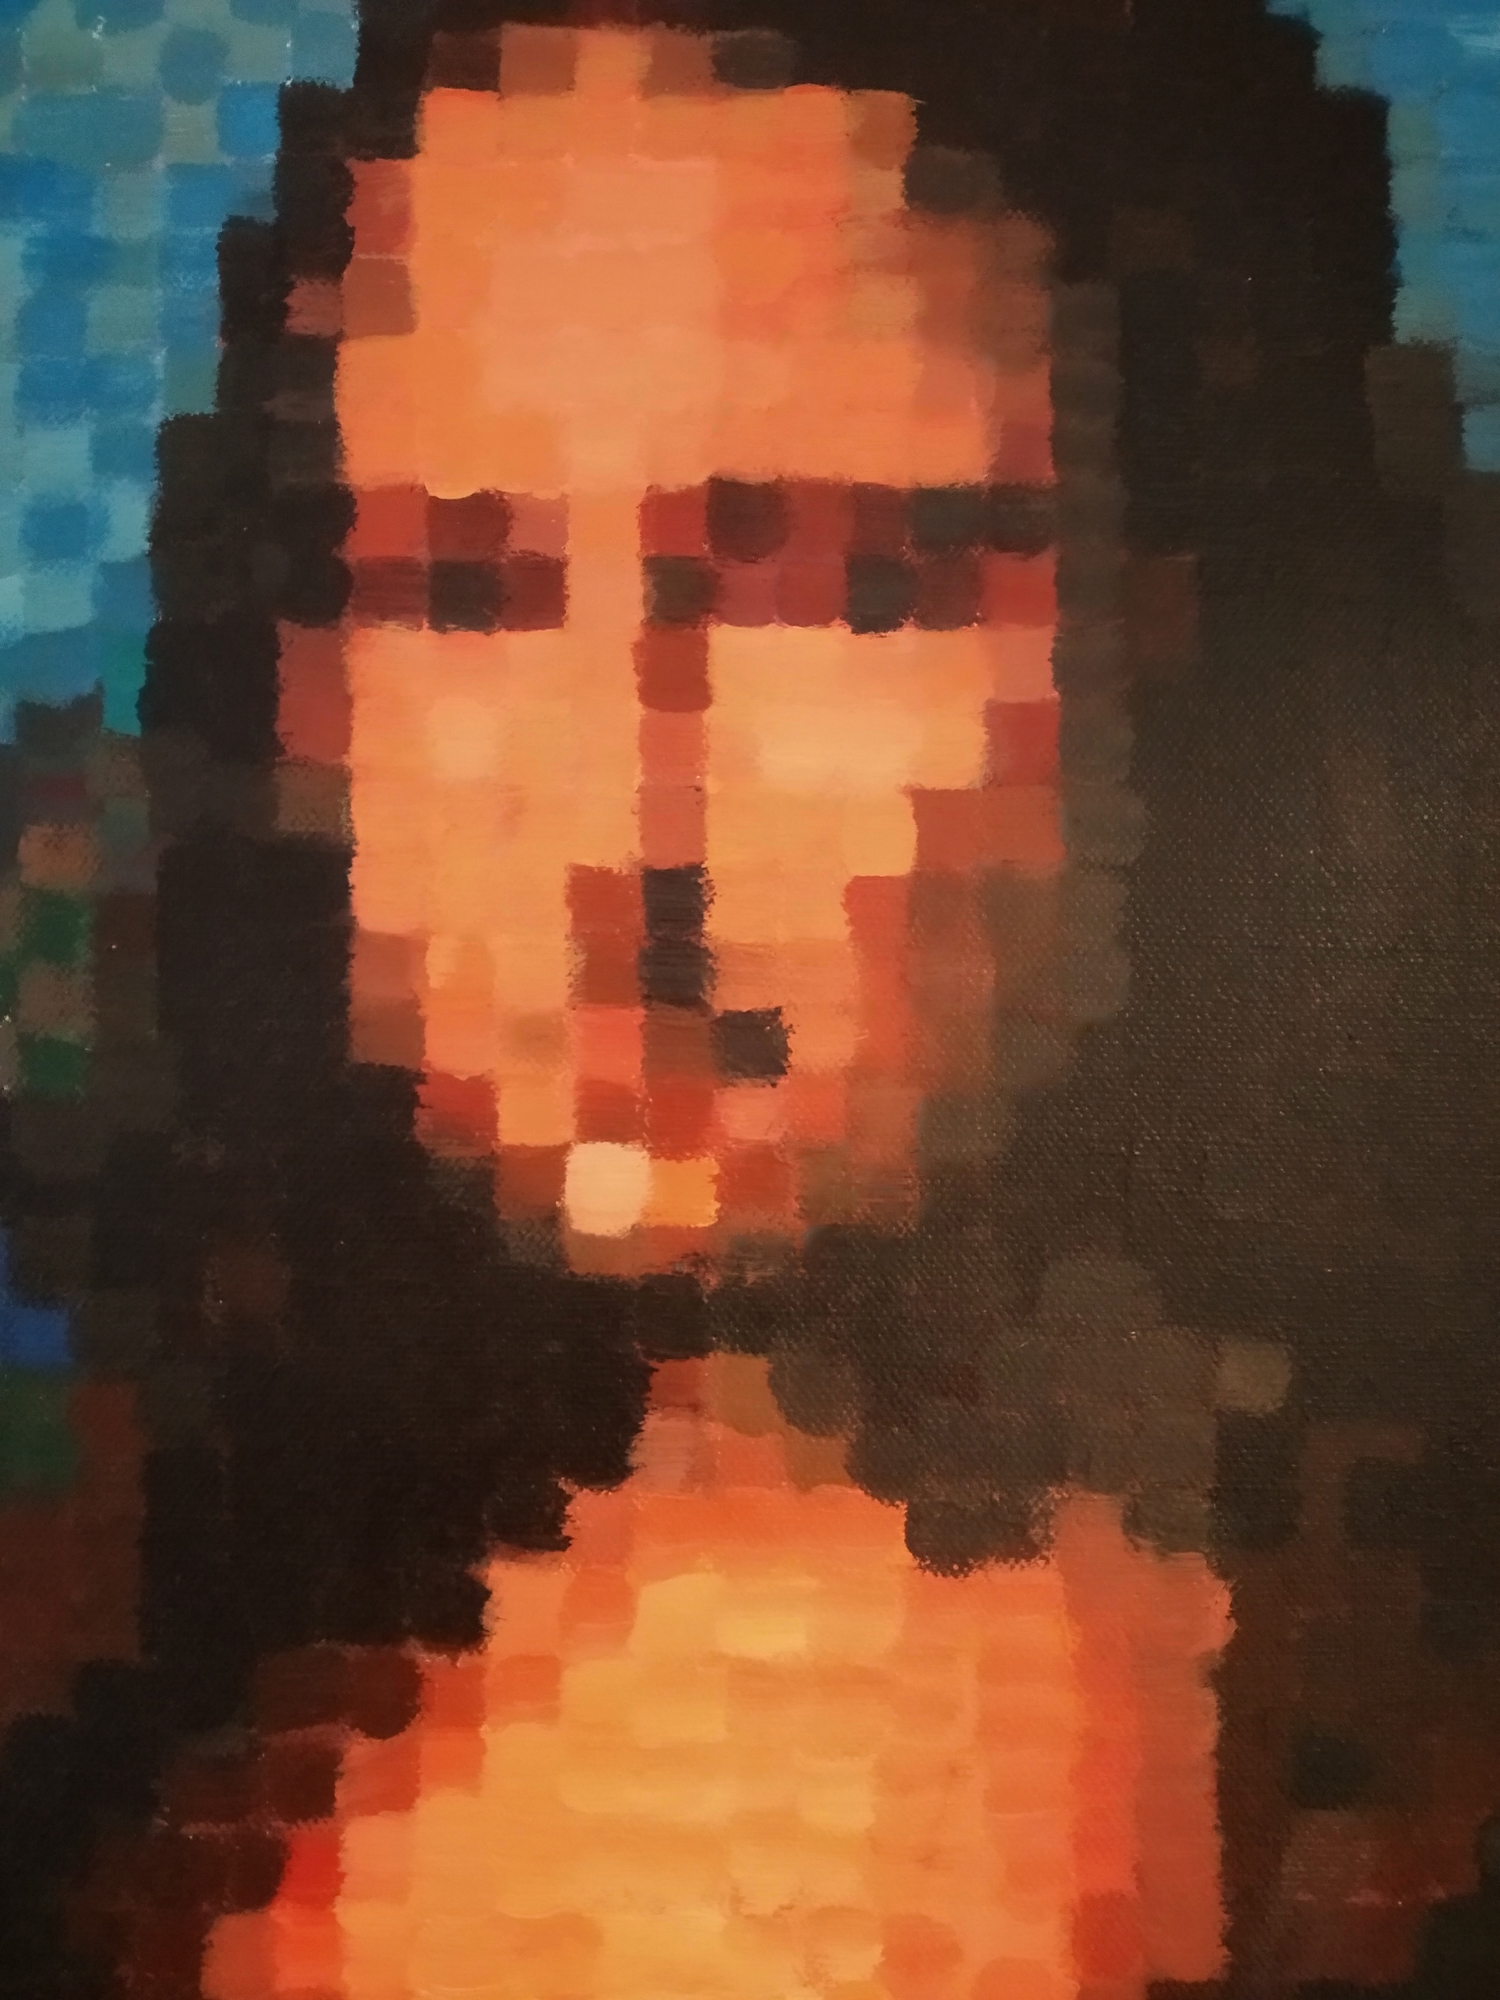 Mona Lisa in low resolution, detail